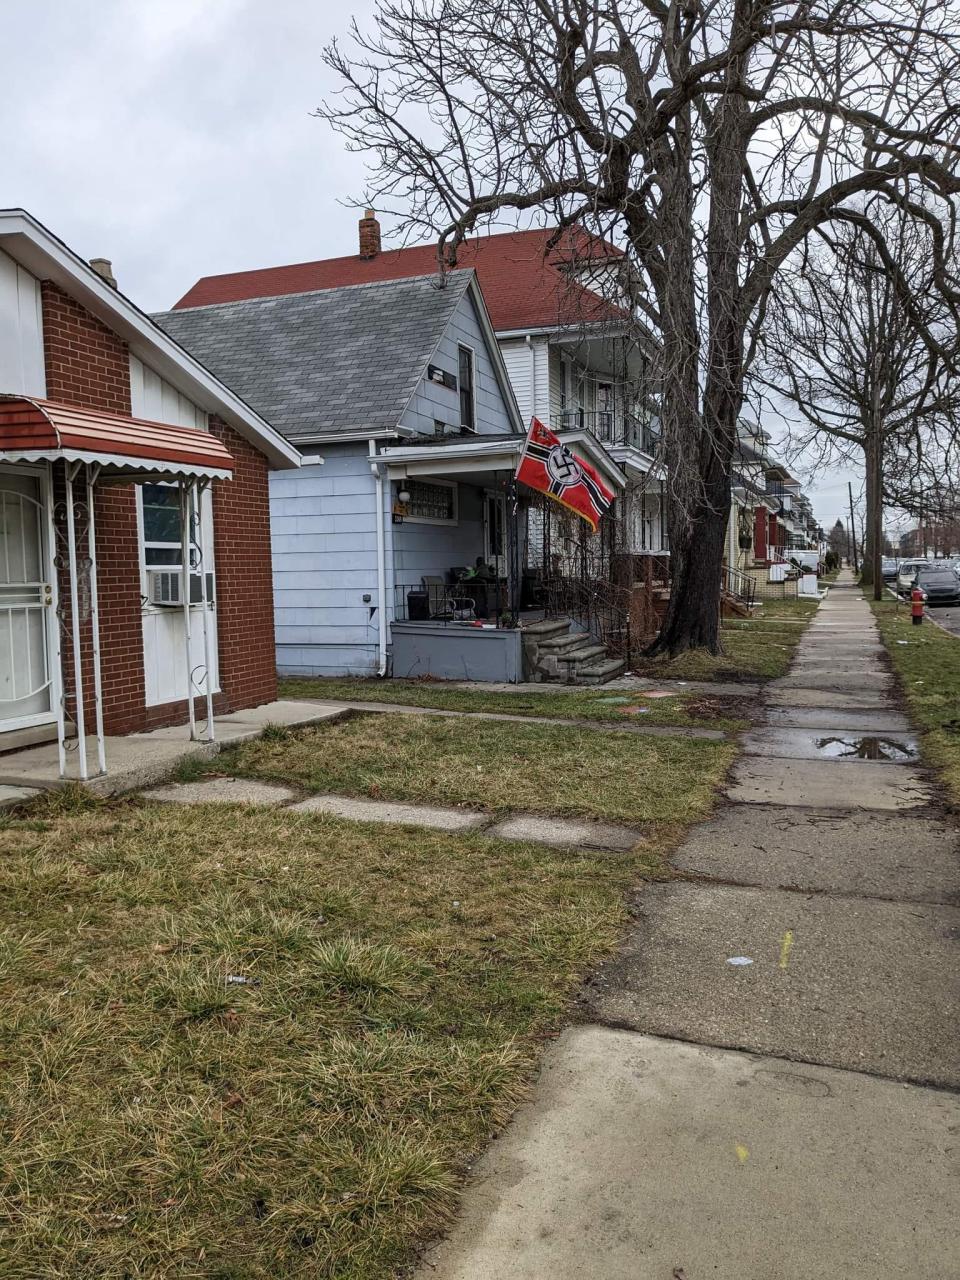 A Doremus Street homeowner sparked outrage in Hamtramck by flying a Nazi flag on their home on Jan. 20, 2023.